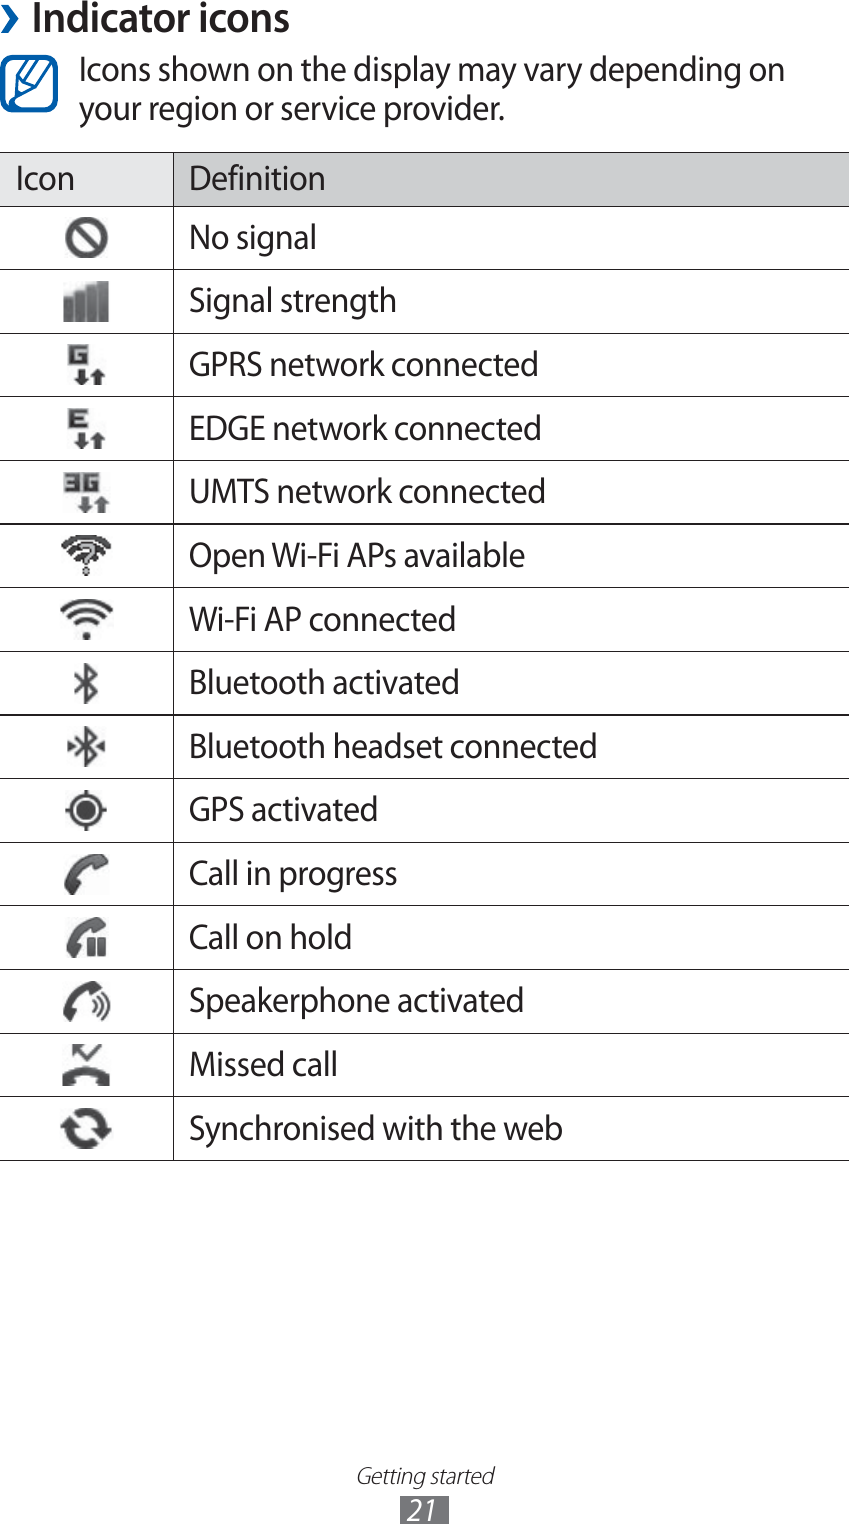 Getting started21Indicator icons ›Icons shown on the display may vary depending on your region or service provider.Icon DefinitionNo signalSignal strengthGPRS network connectedEDGE network connectedUMTS network connectedOpen Wi-Fi APs availableWi-Fi AP connectedBluetooth activatedBluetooth headset connectedGPS activatedCall in progressCall on holdSpeakerphone activatedMissed callSynchronised with the web